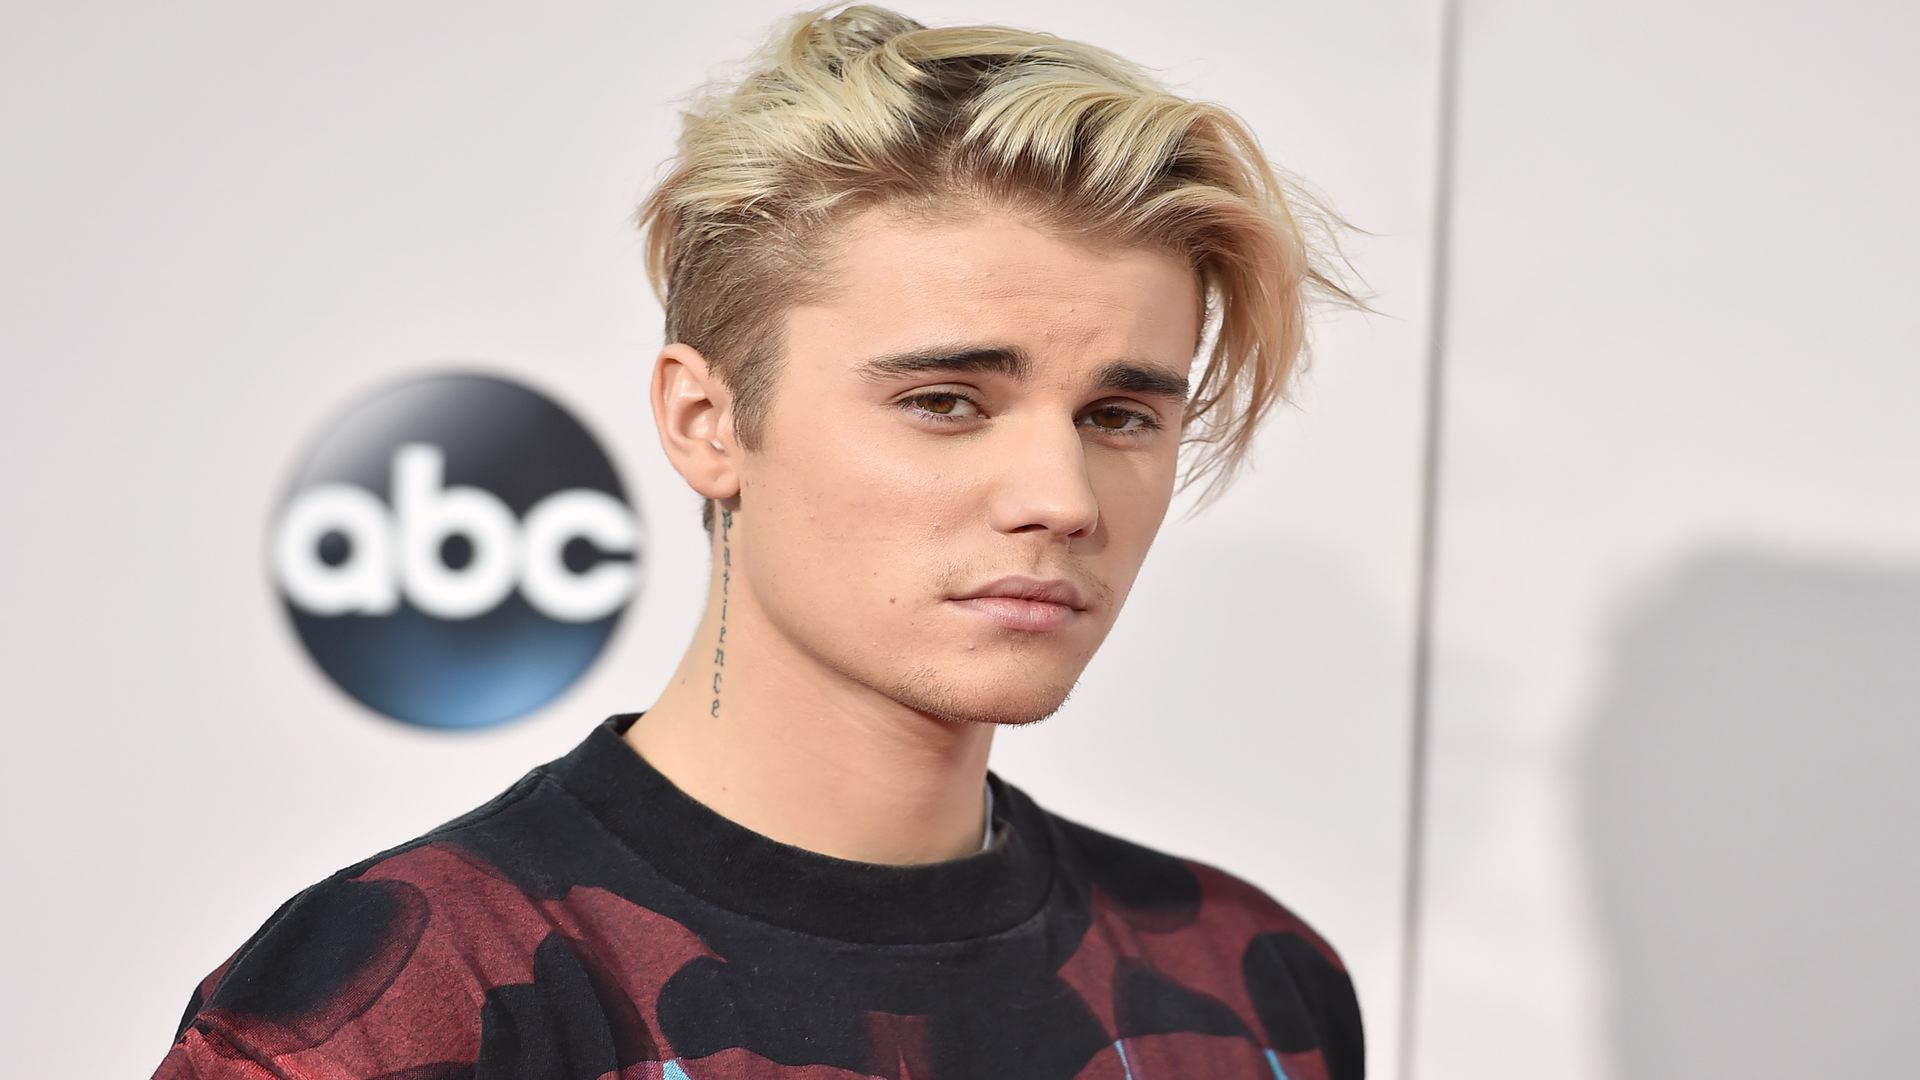 Justin Bieber to be served Indian cuisine representing 29 states